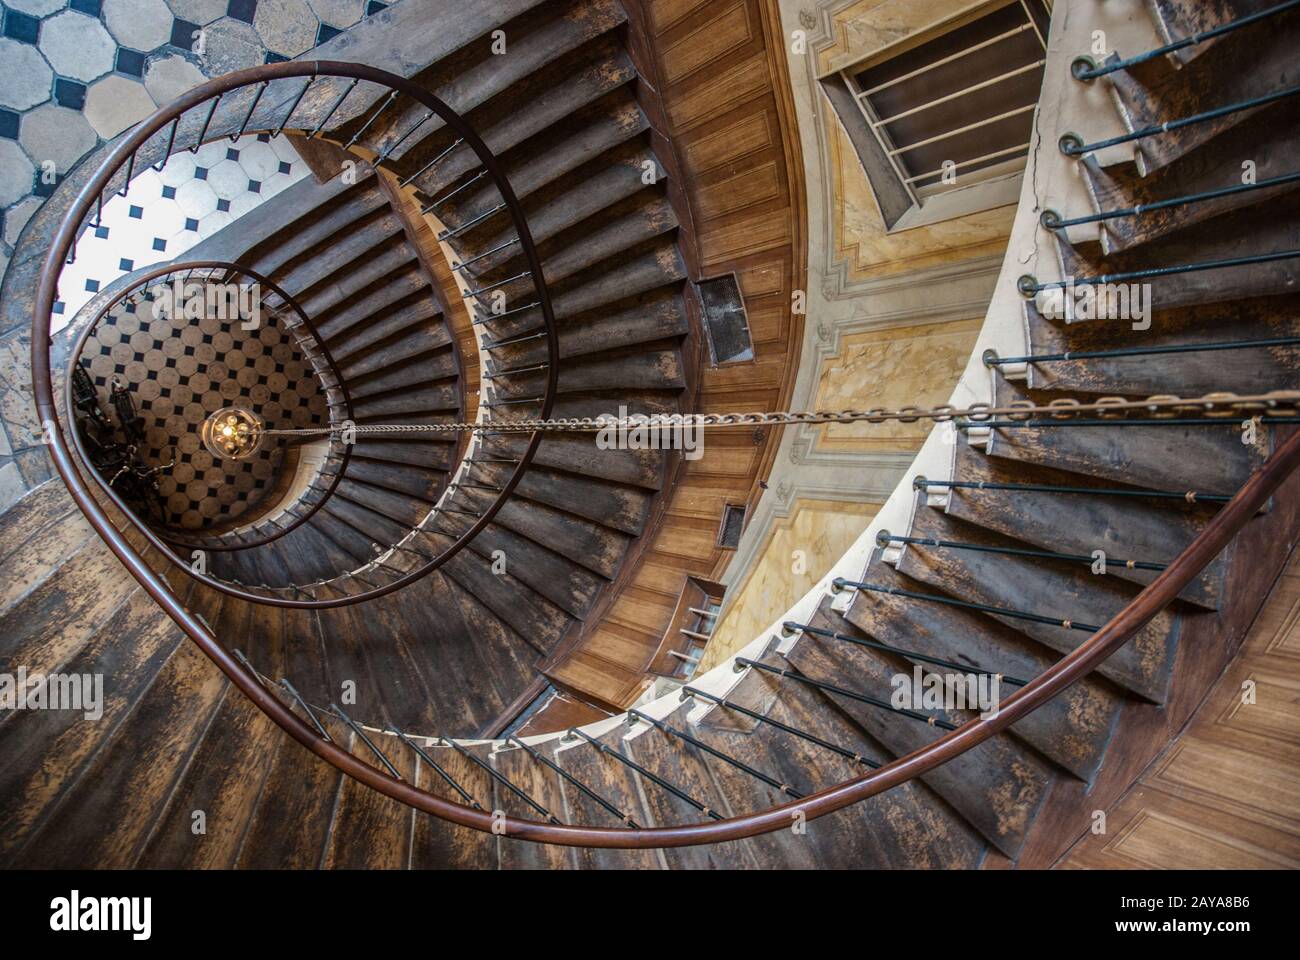 Paris, France - August 05, 2006: Top view of the architectural element of the spiral staircase in the gallery of Vivienne Stock Photo